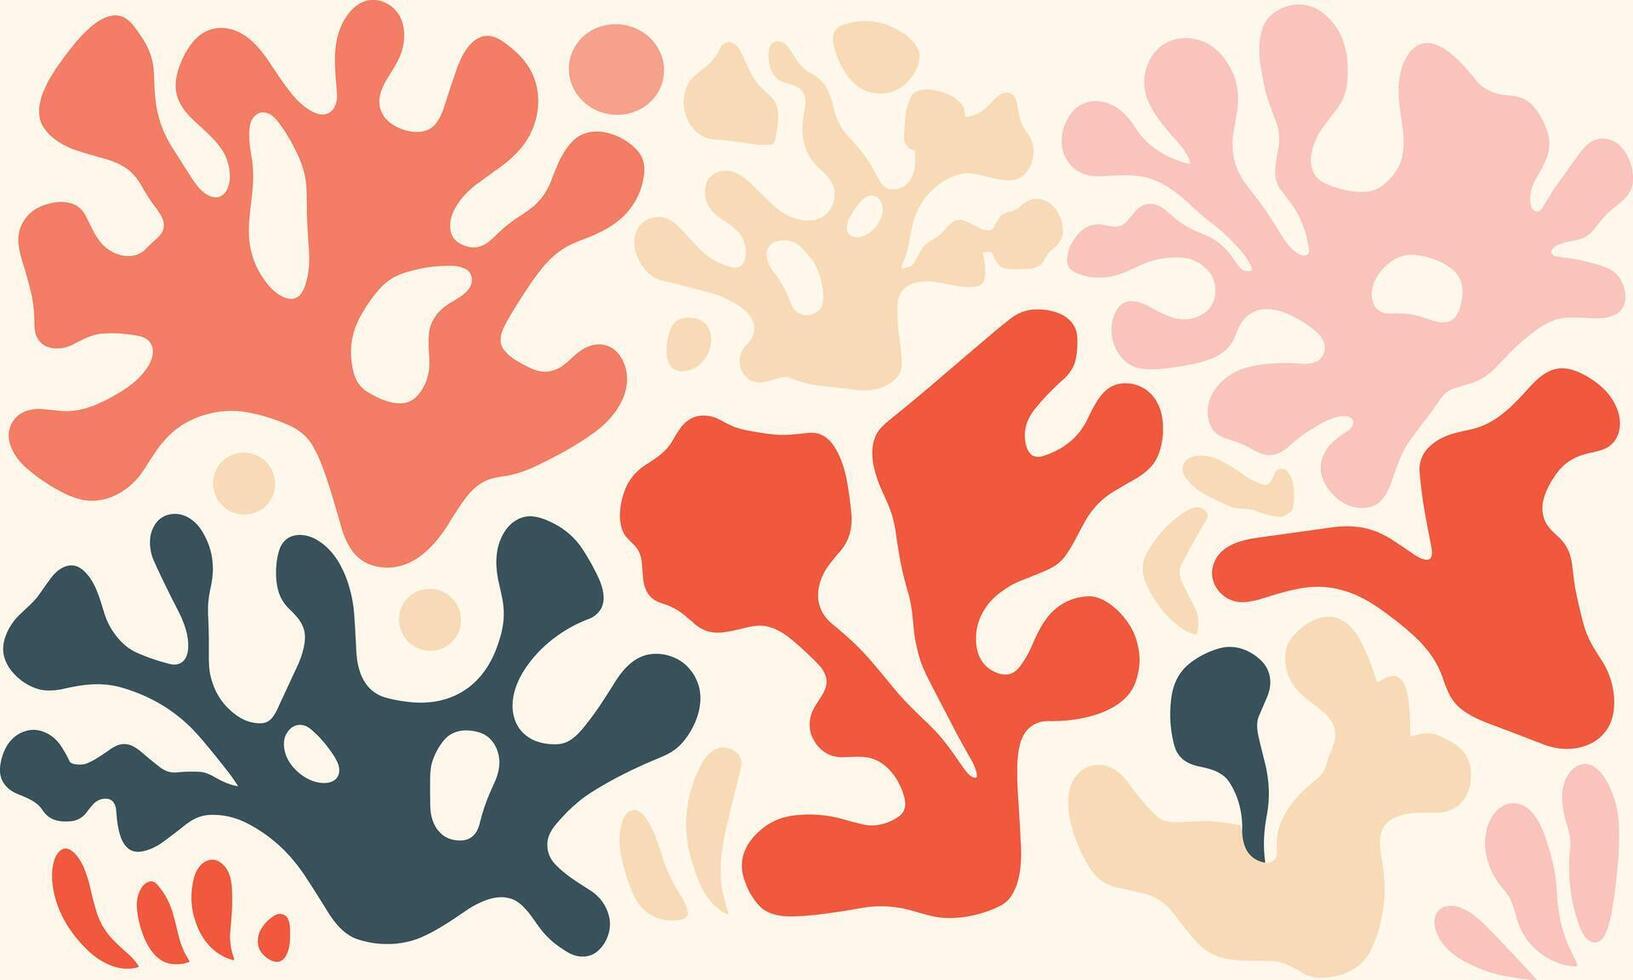 Minimalist Vector Art of Matisse Cutout Shapes for Corals in Muted Colors, Minimally Editing the Original Text. Matisse in the Style of Matisse. No Chinese Characters Were Present To Remove